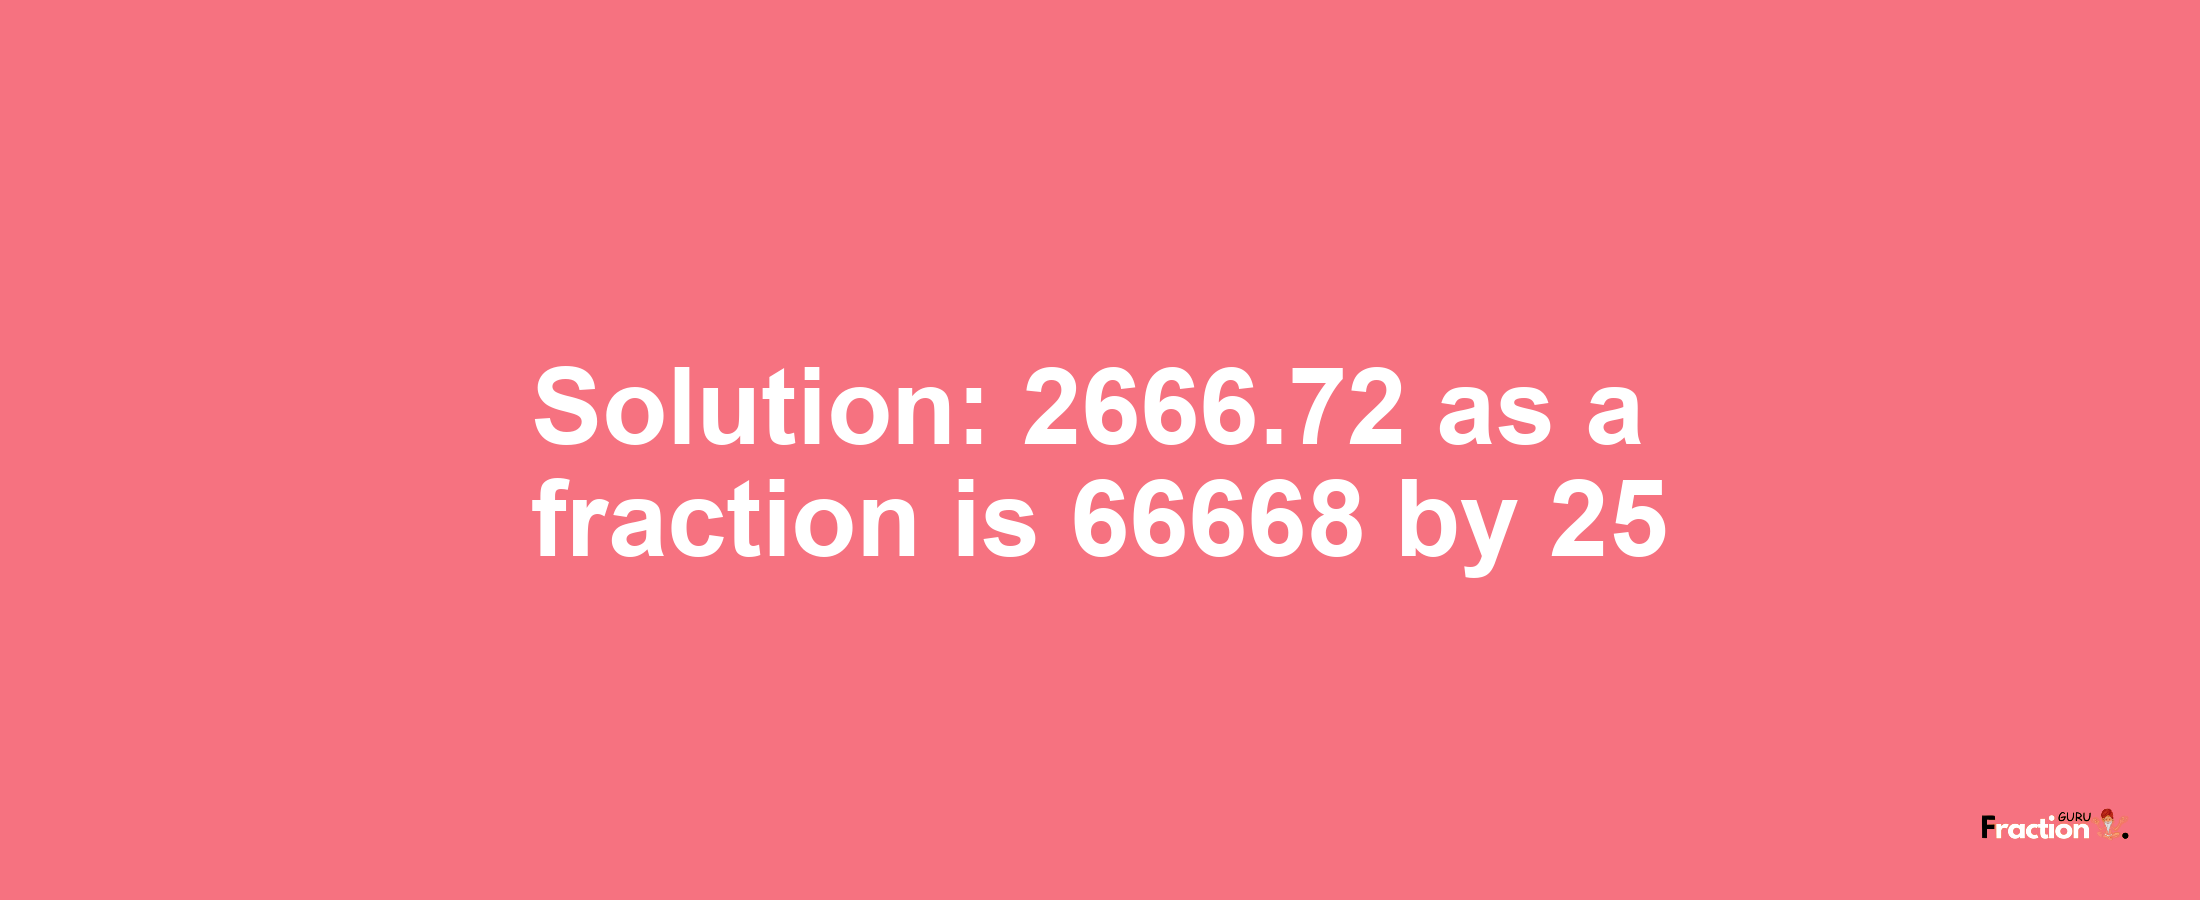 Solution:2666.72 as a fraction is 66668/25